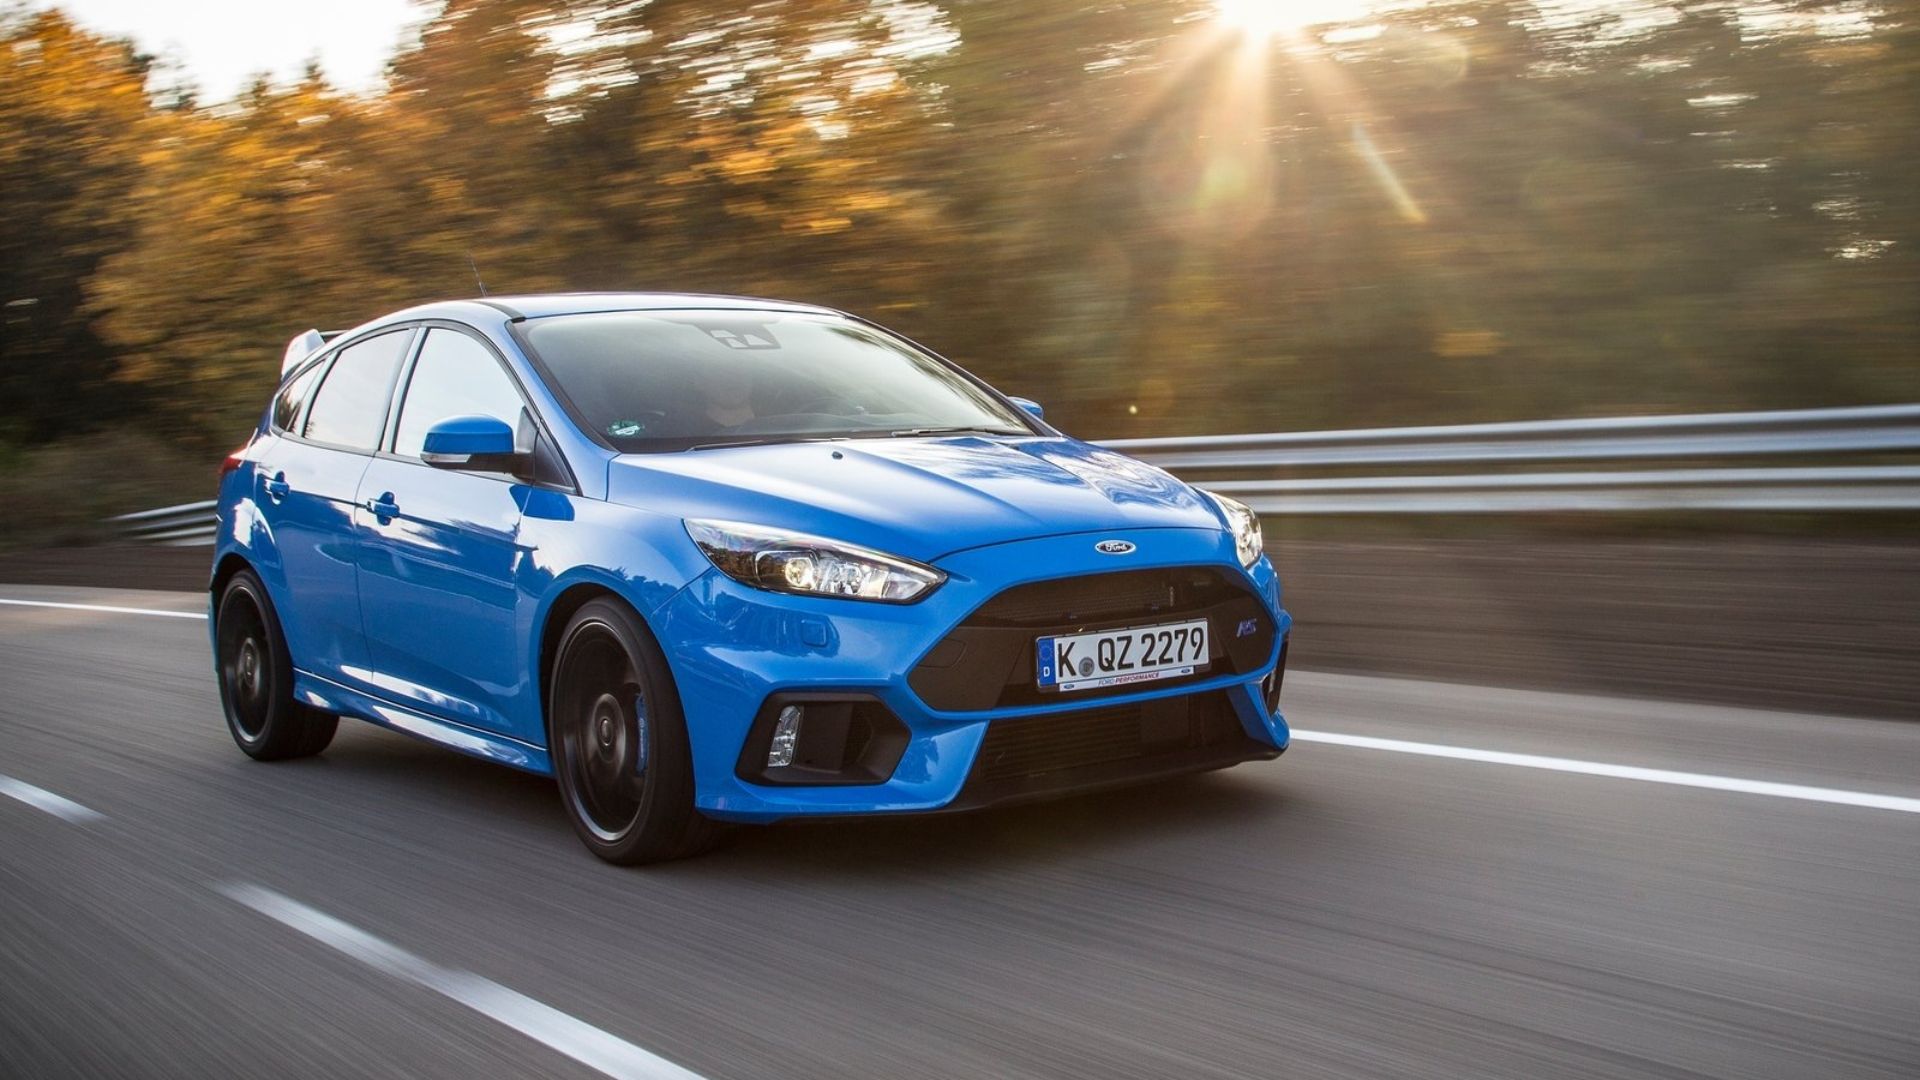 The Ford Focus RS can drift right from the factory.